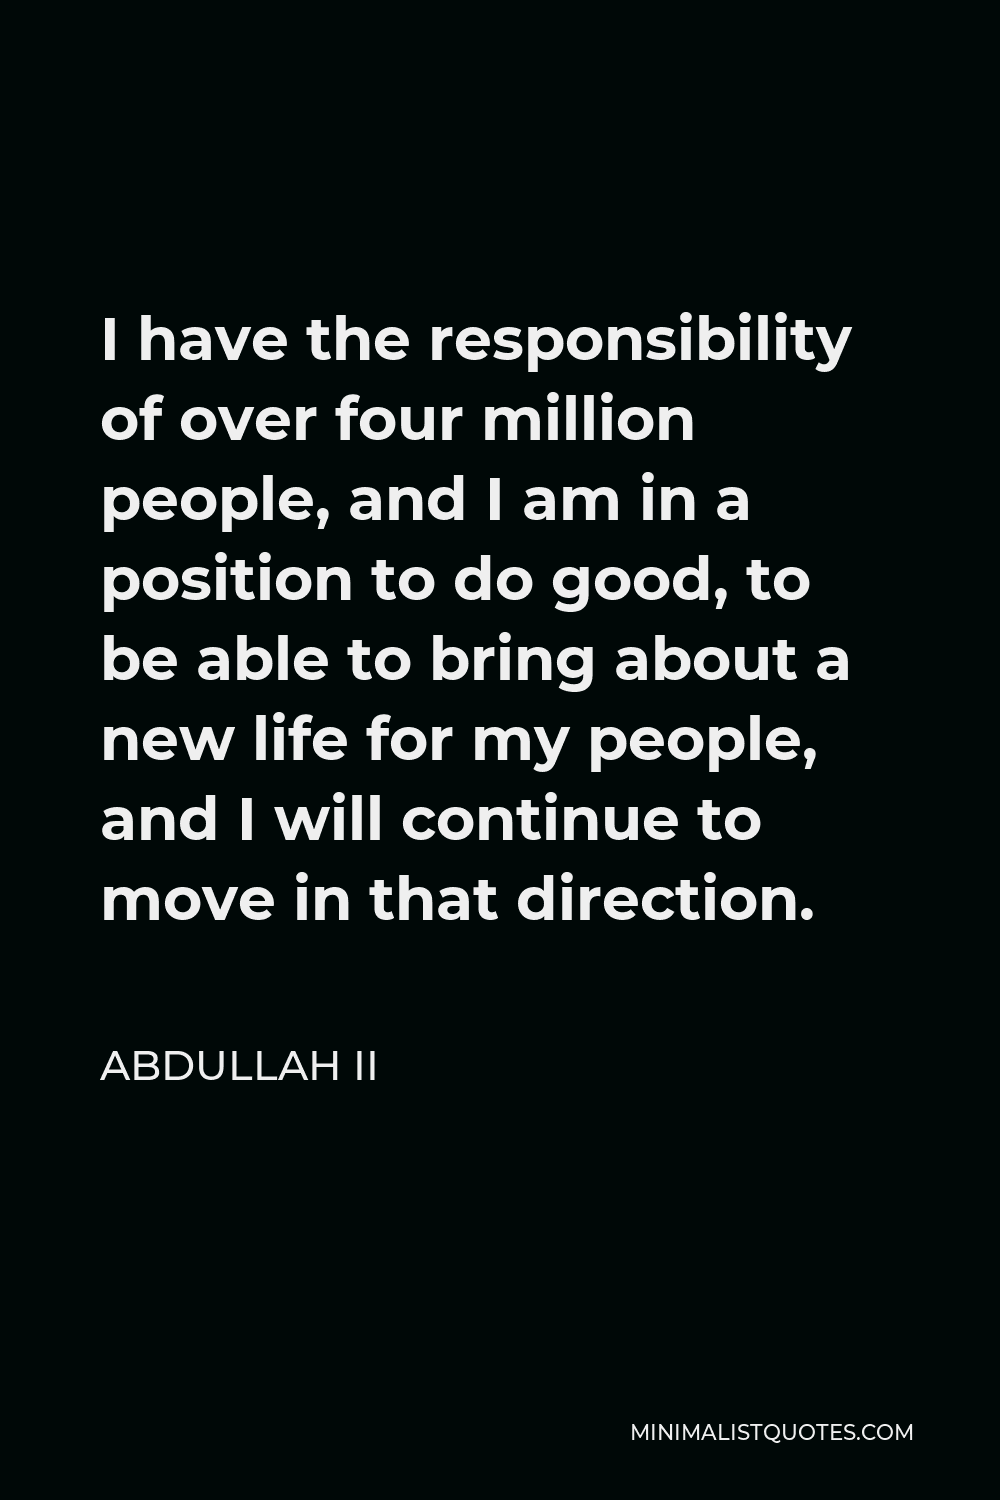 Abdullah II Quote - I have the responsibility of over four million people, and I am in a position to do good, to be able to bring about a new life for my people, and I will continue to move in that direction.